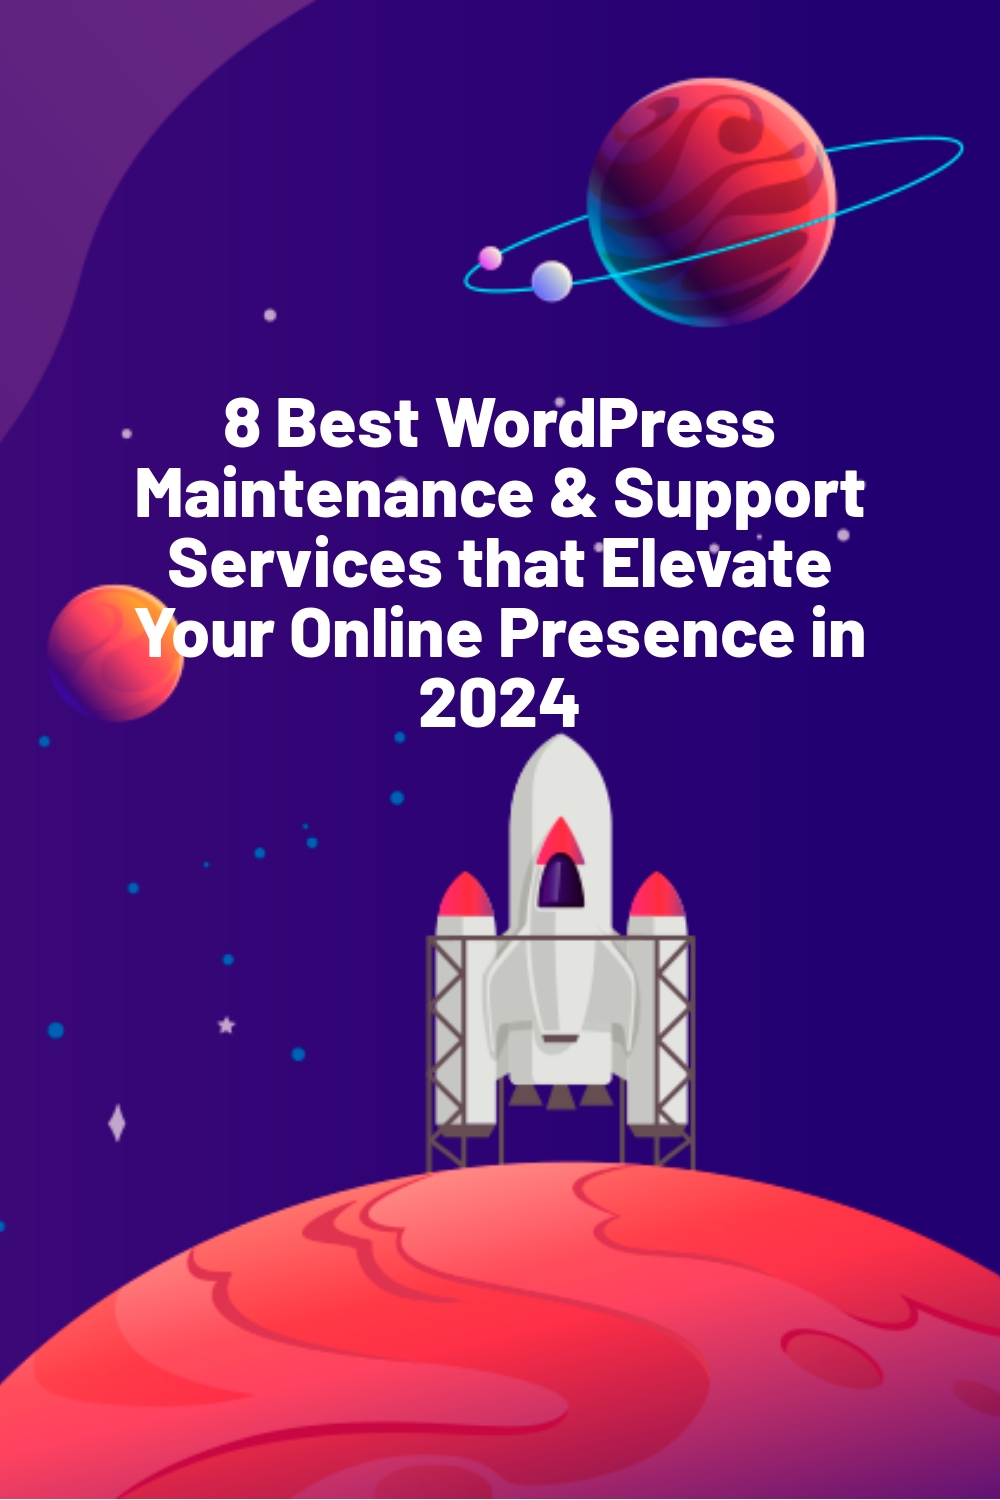 8 Best WordPress Maintenance & Support Services that Elevate Your Online Presence in 2024